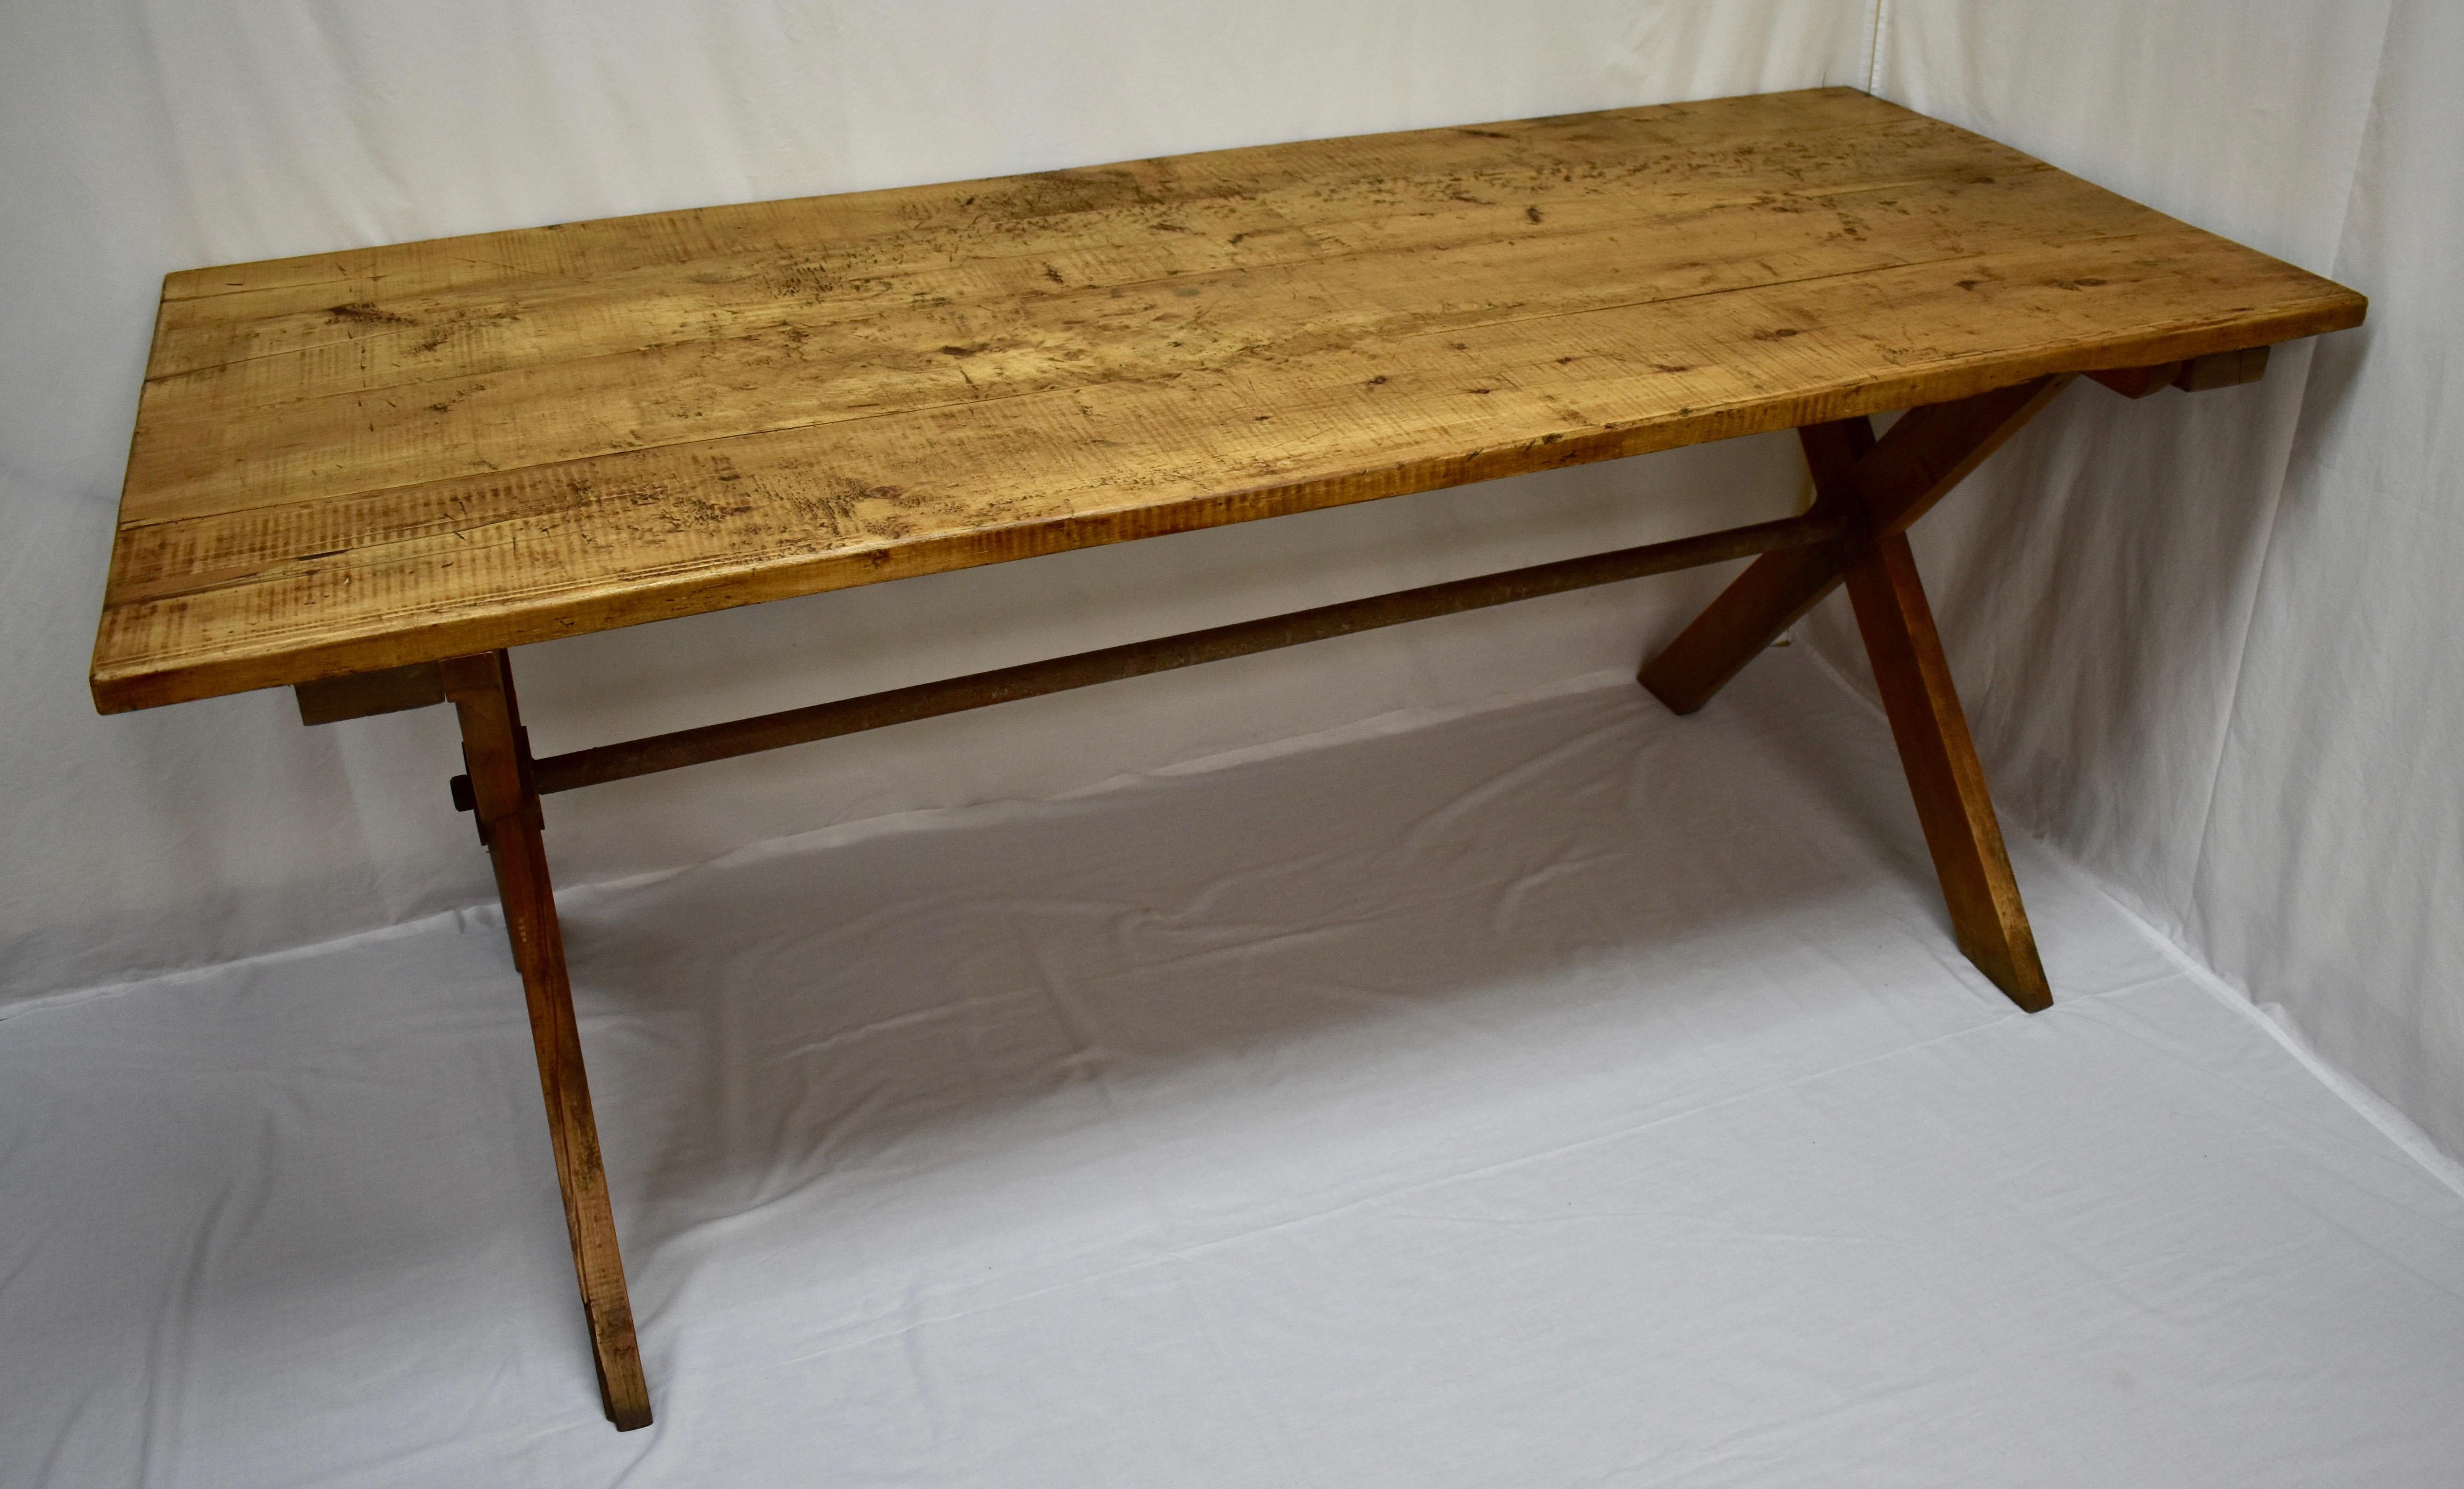 This is a beautifully worn “X” base trestle table, perfect for a country kitchen or dining room. The four board pine top, 1.25” thick, is scratched, chipped and gnarled and shows great character, developed over decades of purposeful use. It is